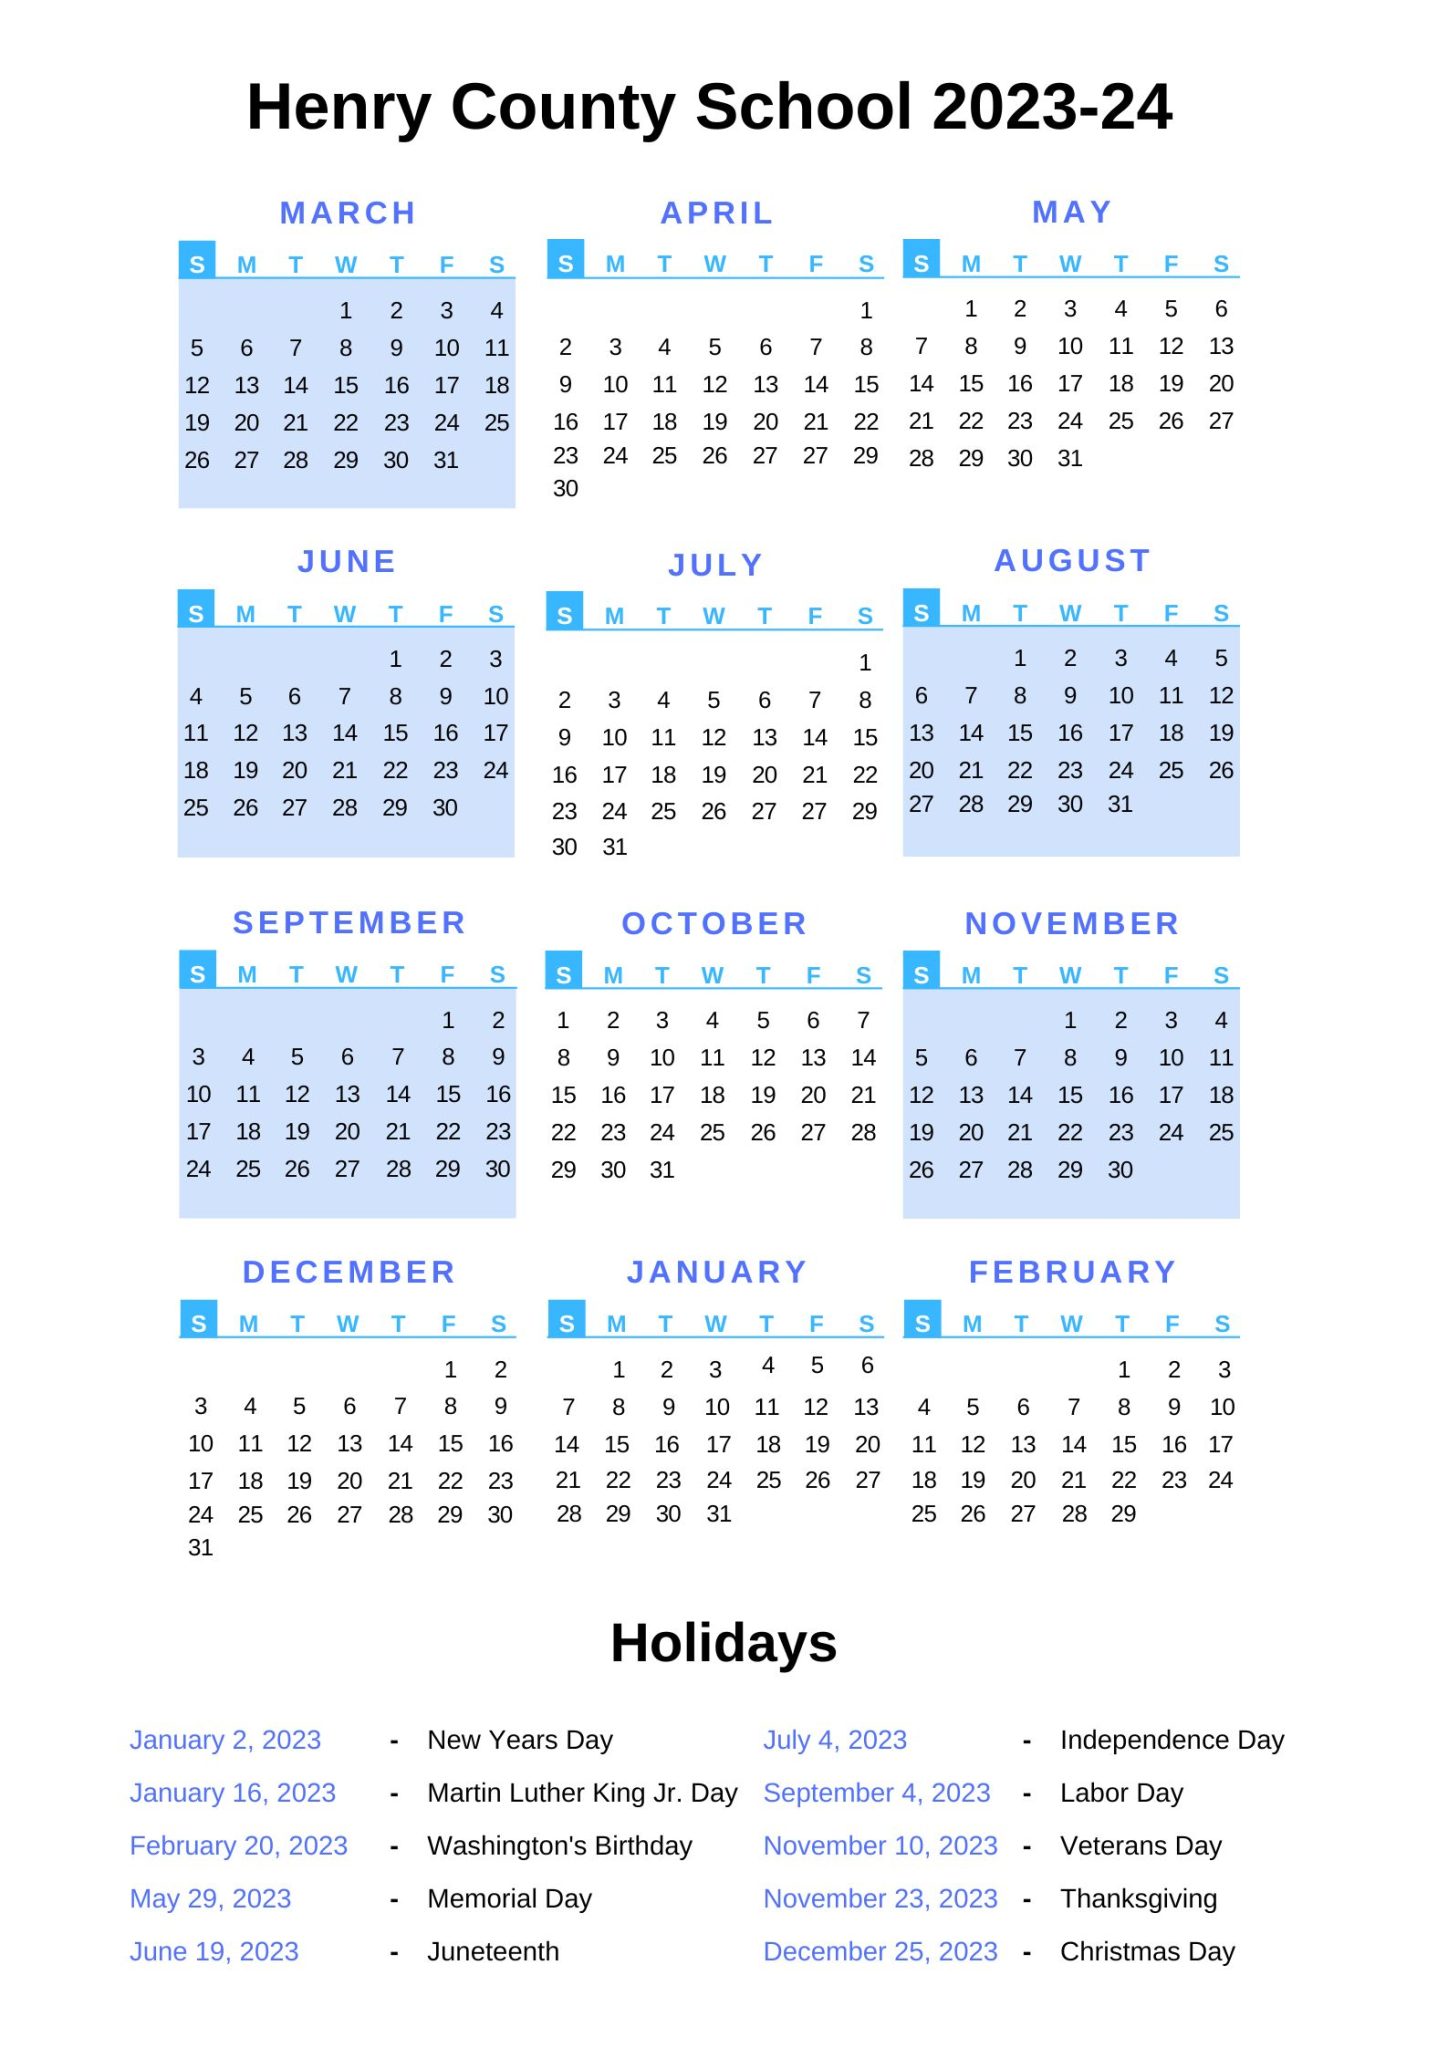 Henry County Schools Calendar With Holidays 20222023